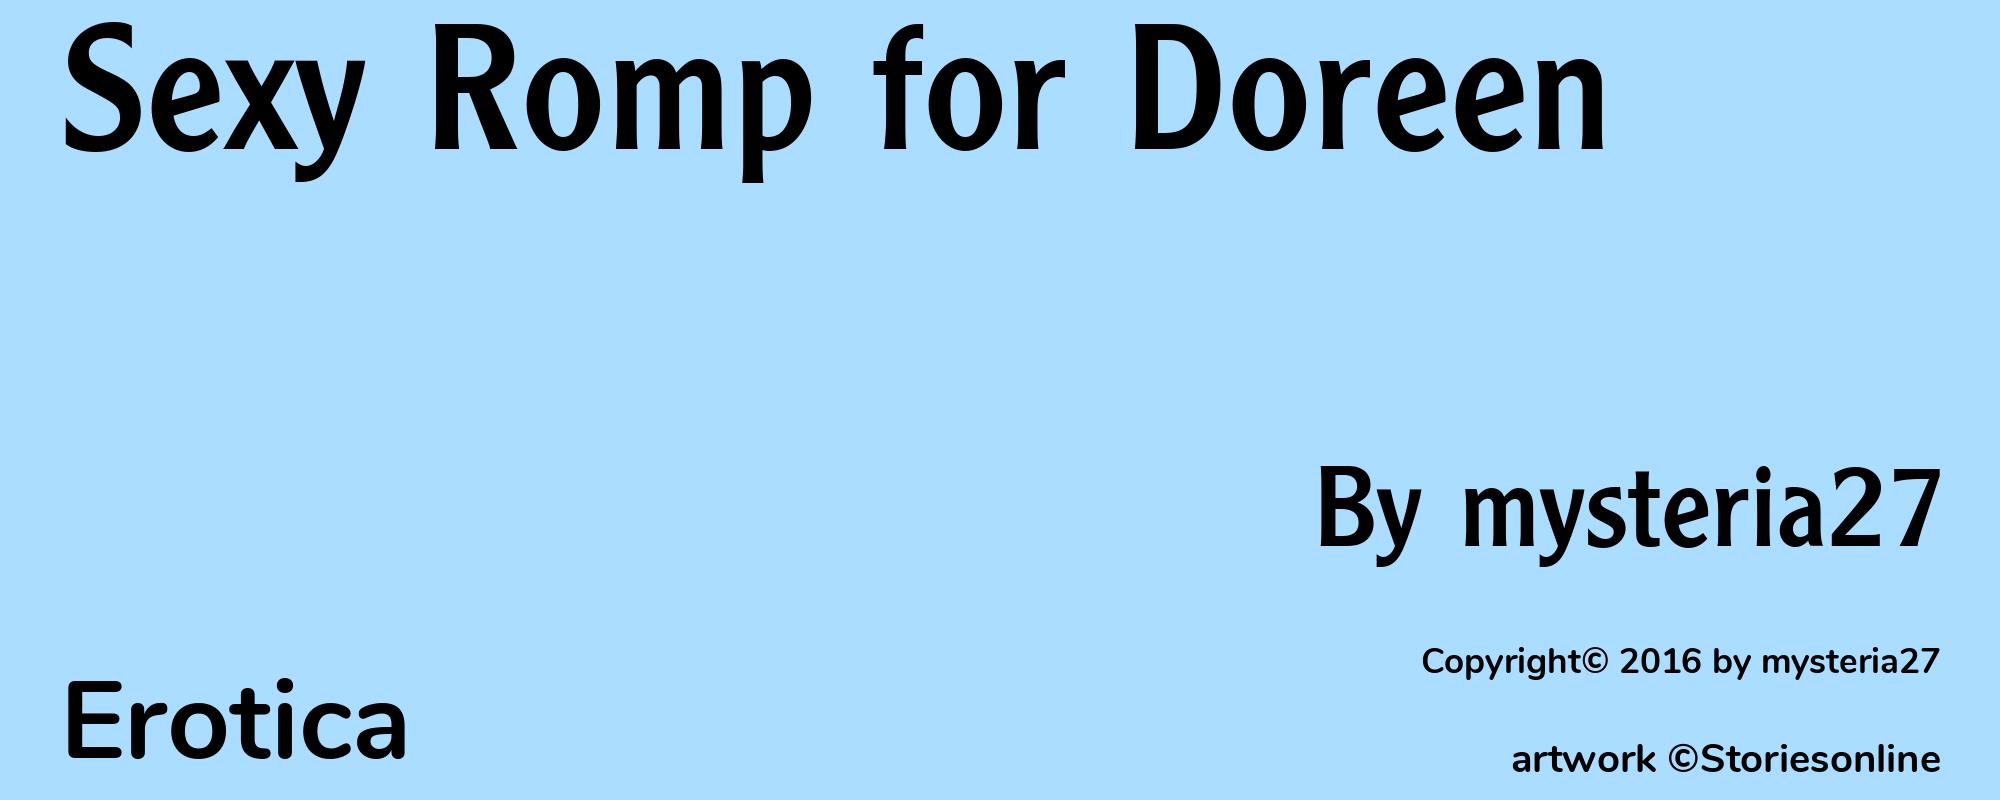 Sexy Romp for Doreen - Cover